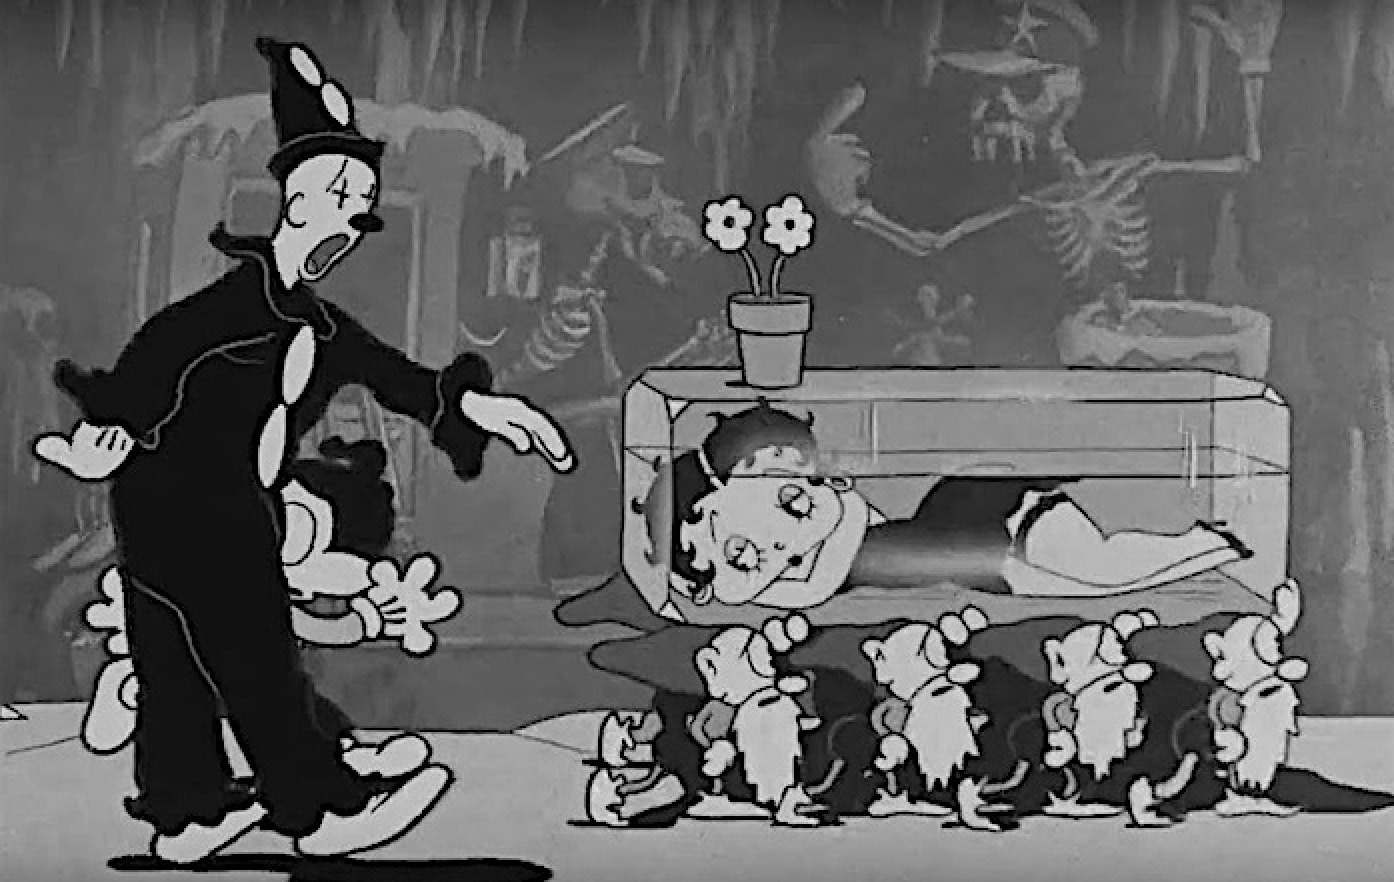 Watch a Surreal 1933 Animation of Snow White, Featuring Cab Calloway & Betty Boop: It’s Ranked as the 19th Greatest Cartoon of All Time